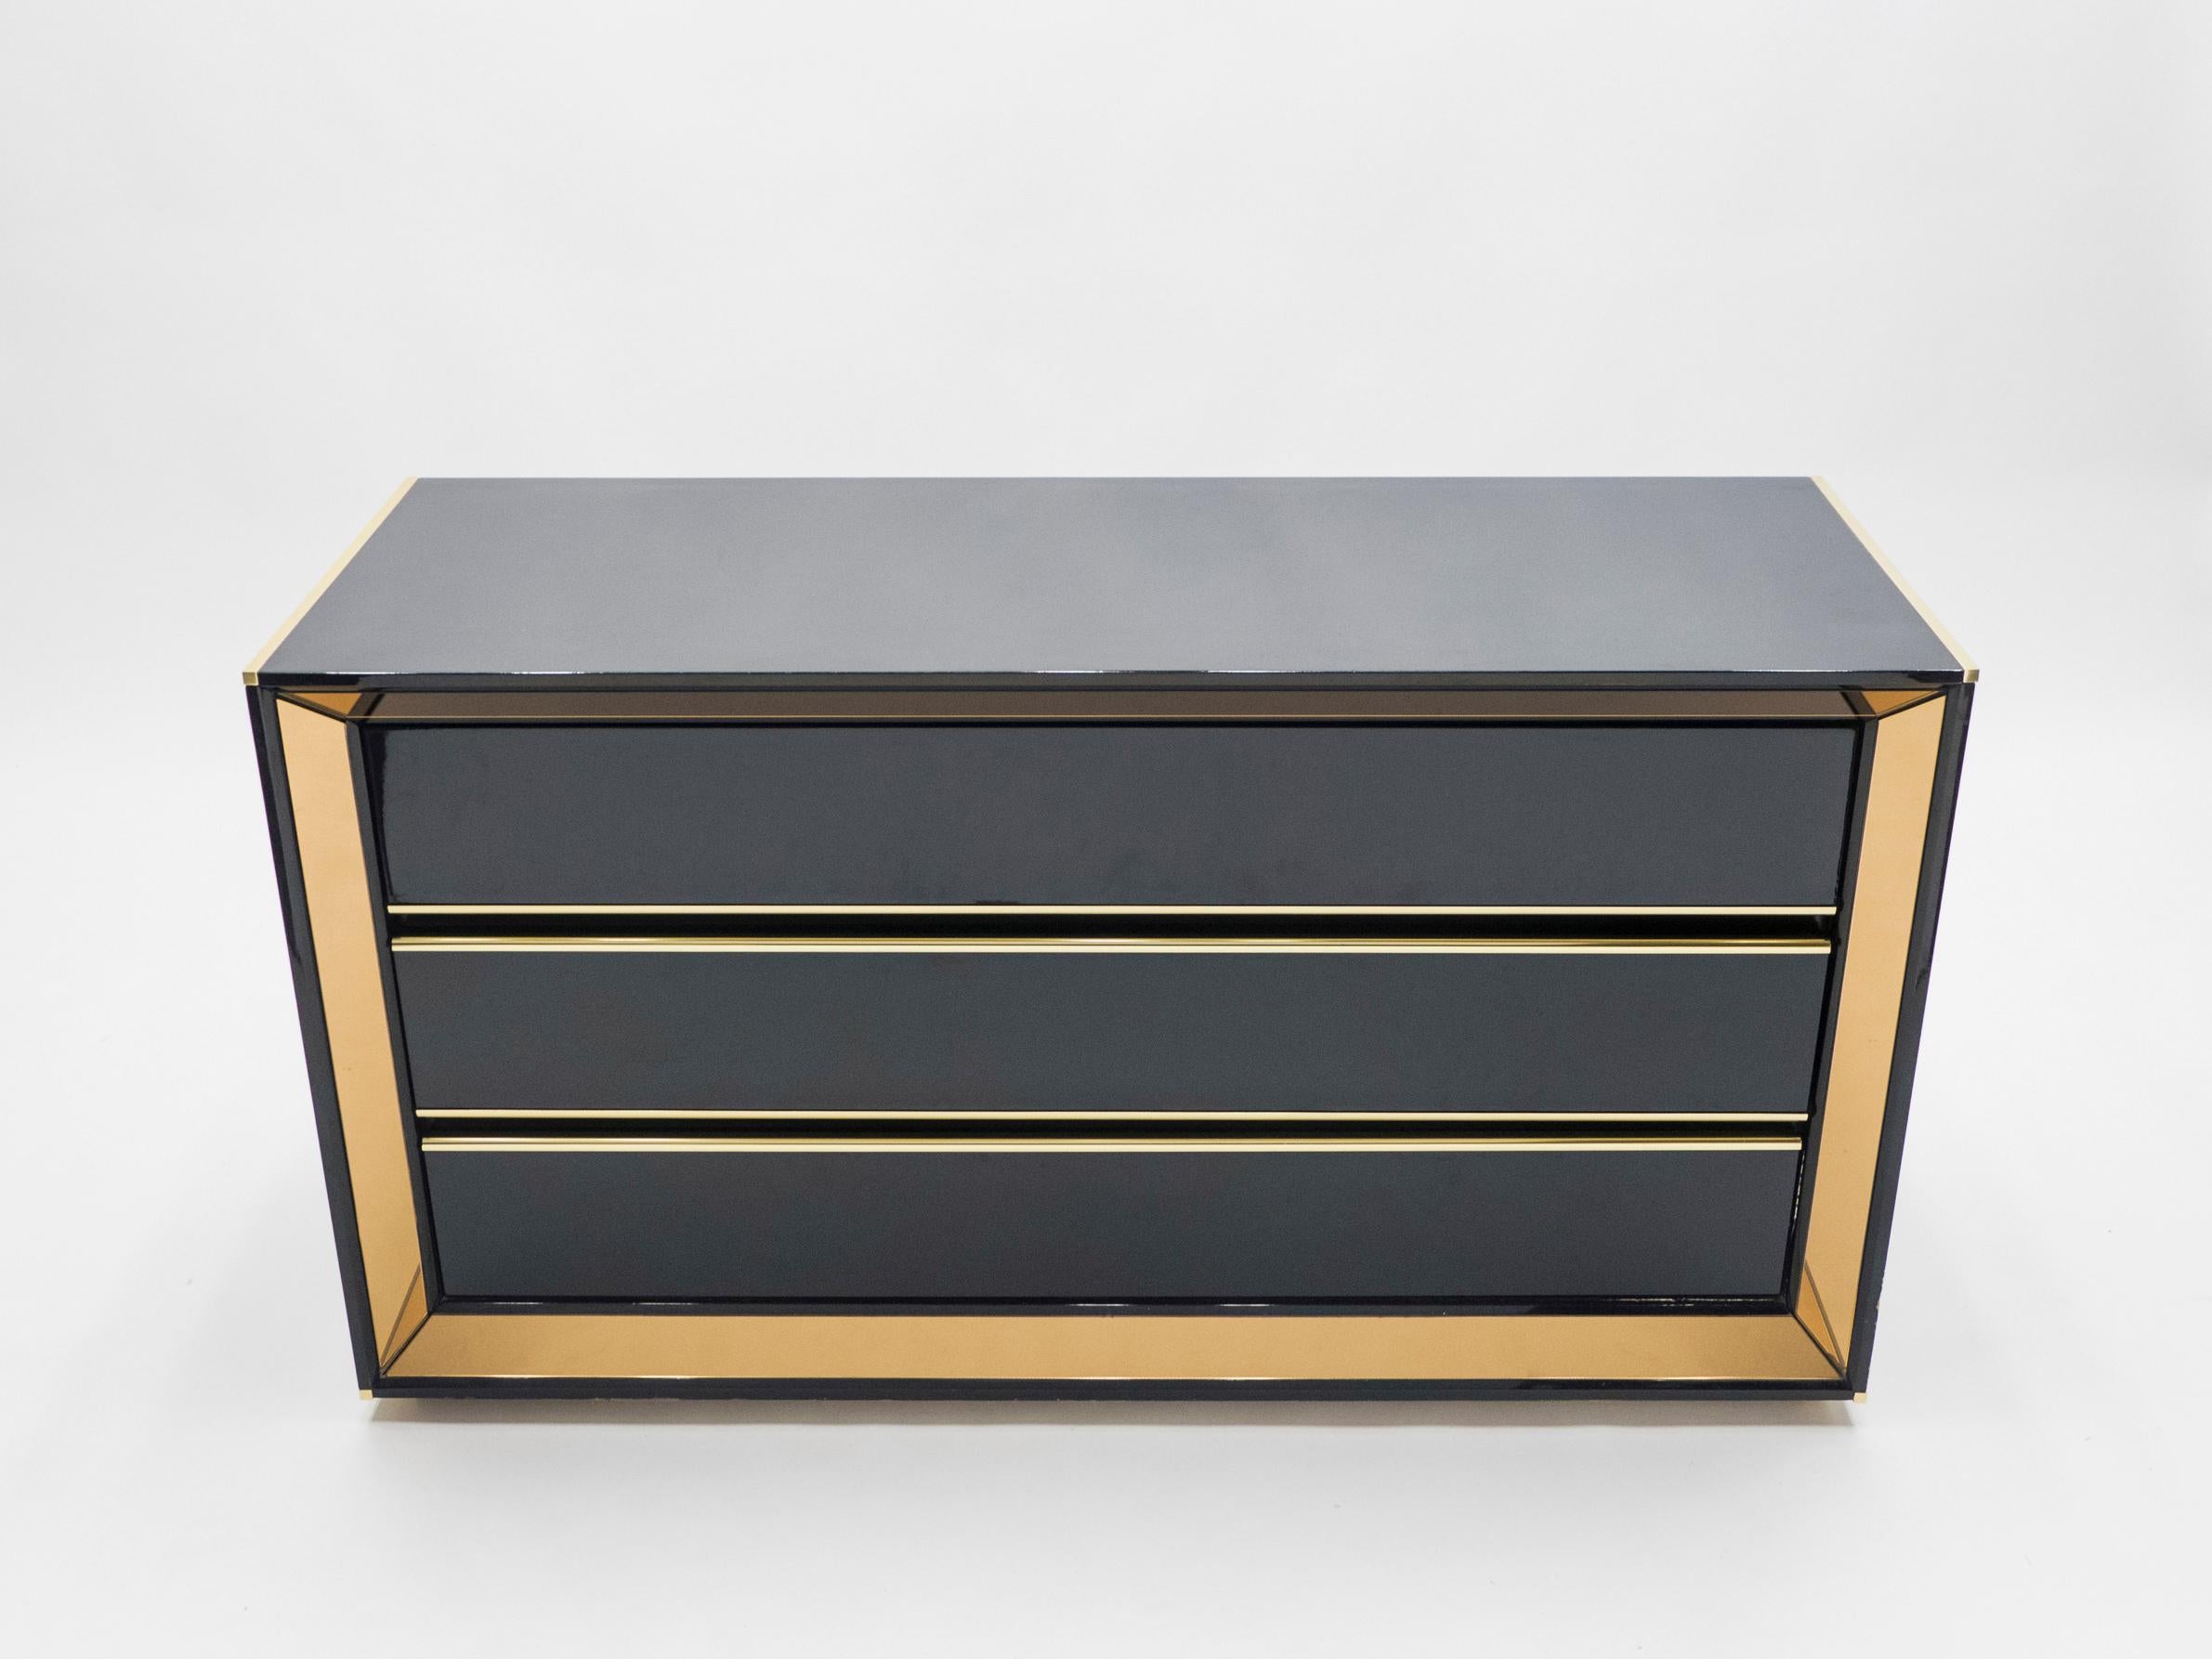 This Italian Hollywood Regency black lacquered chest of drawers would be stunning in any room. The shiny black lacquer coating is the appropriate match to the bronze-tinted mirror frame, both reflecting light in a subdued way and creating a chic